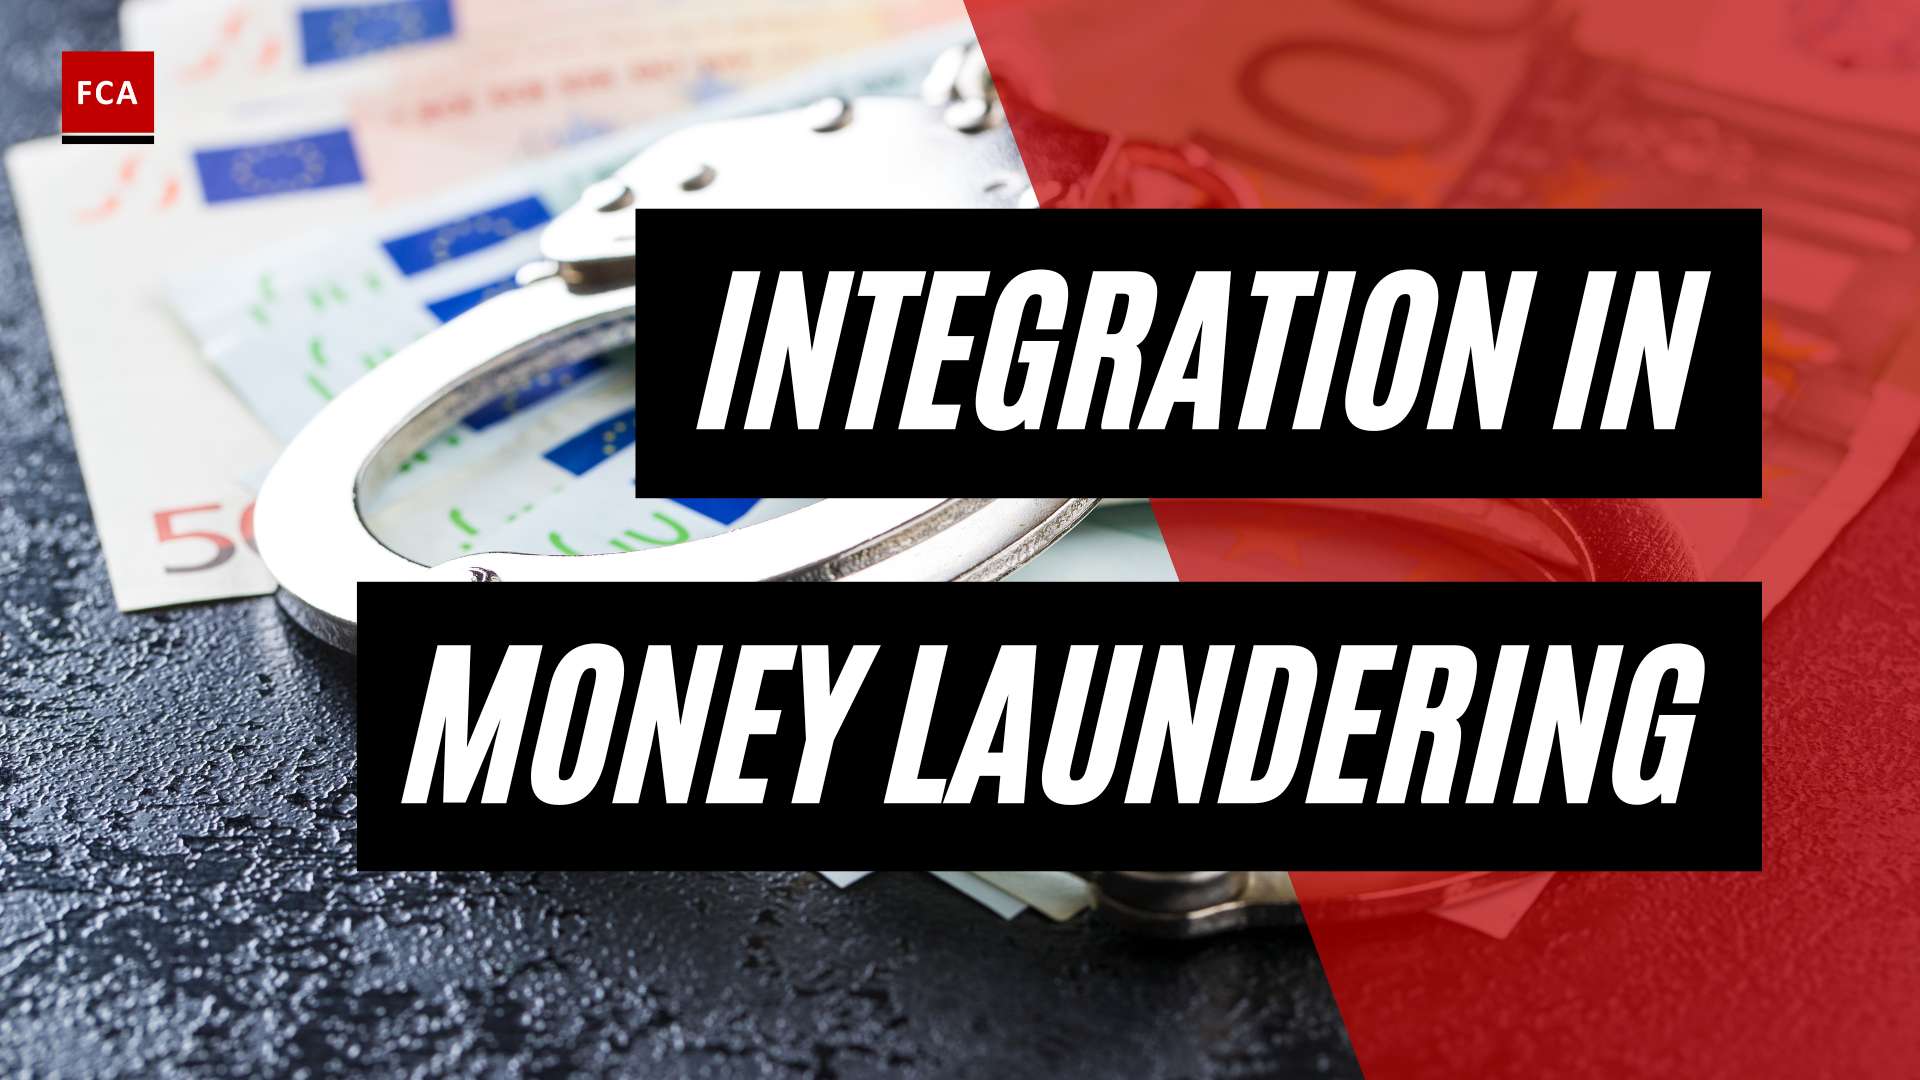 Laundering Undetected: The Art Of Integration In Money Laundering